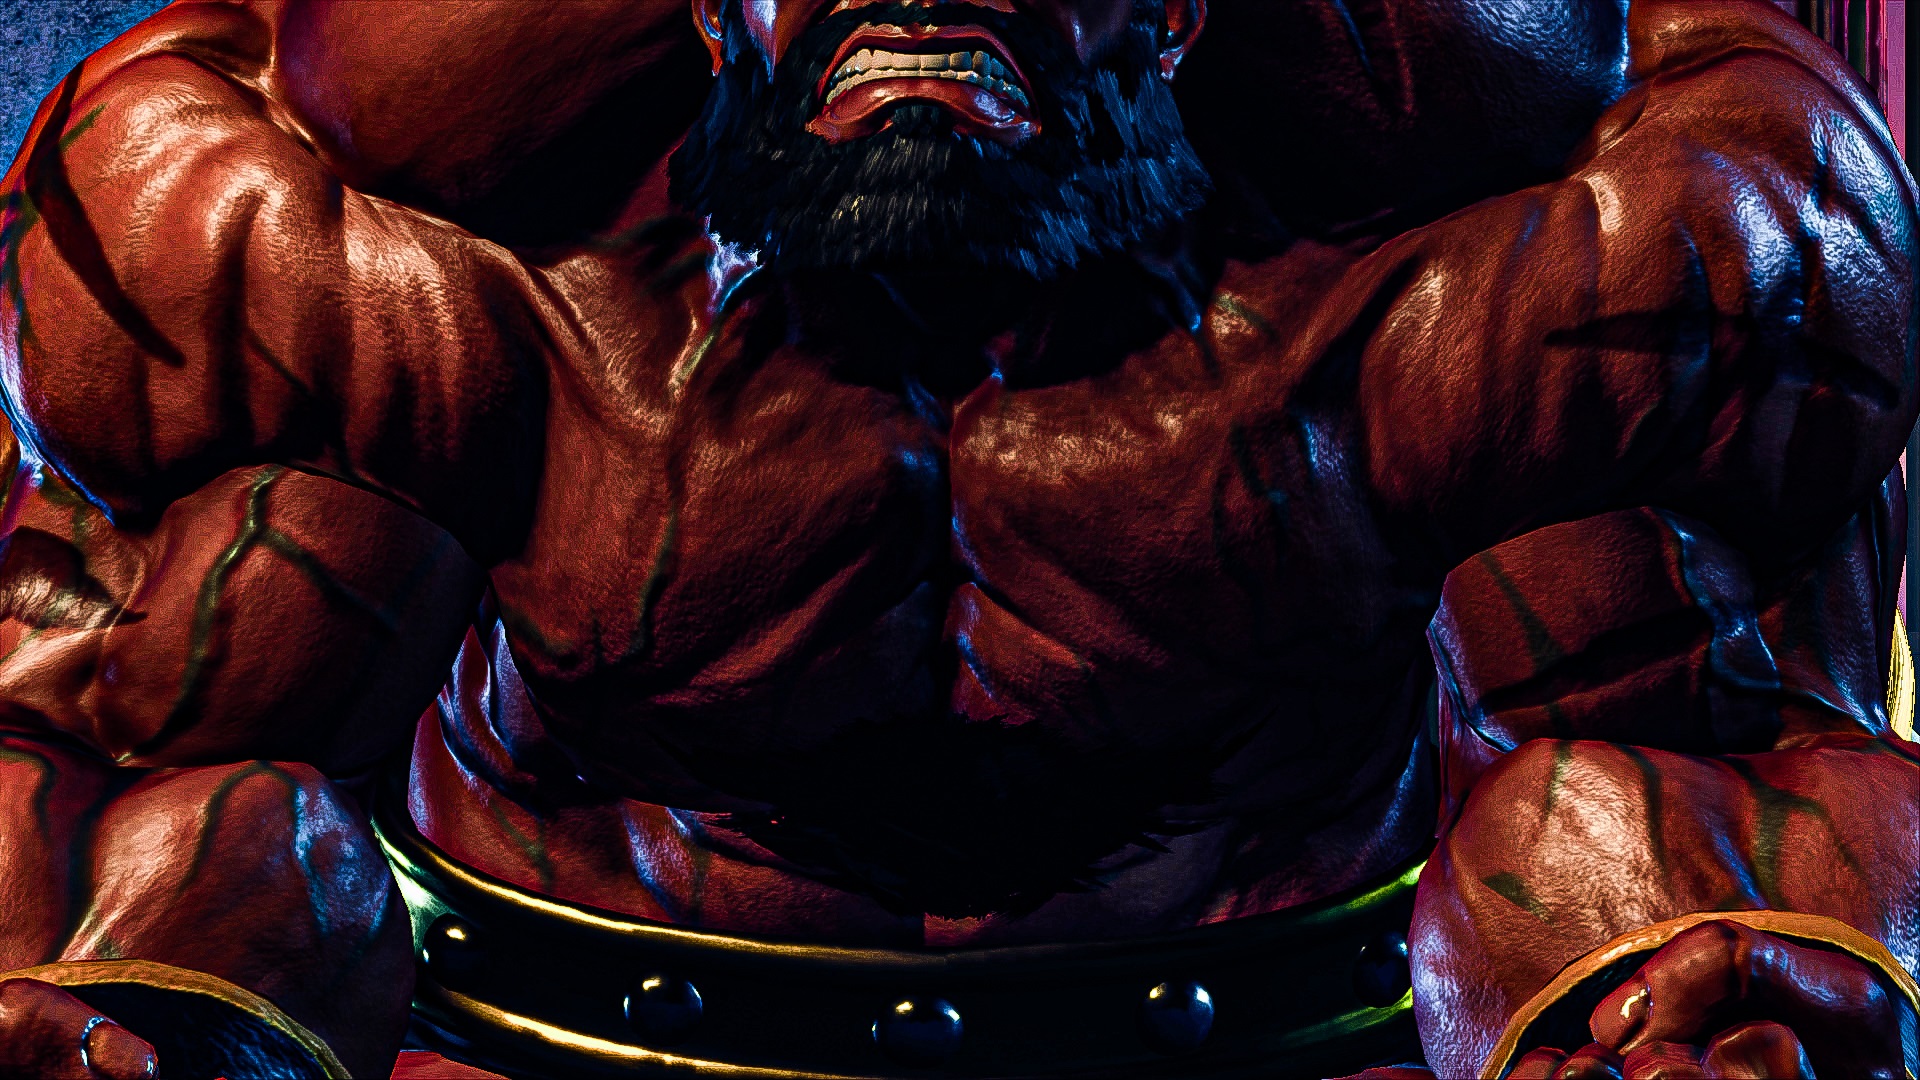 SF6 - Zangief #16 by NgTDat on DeviantArt